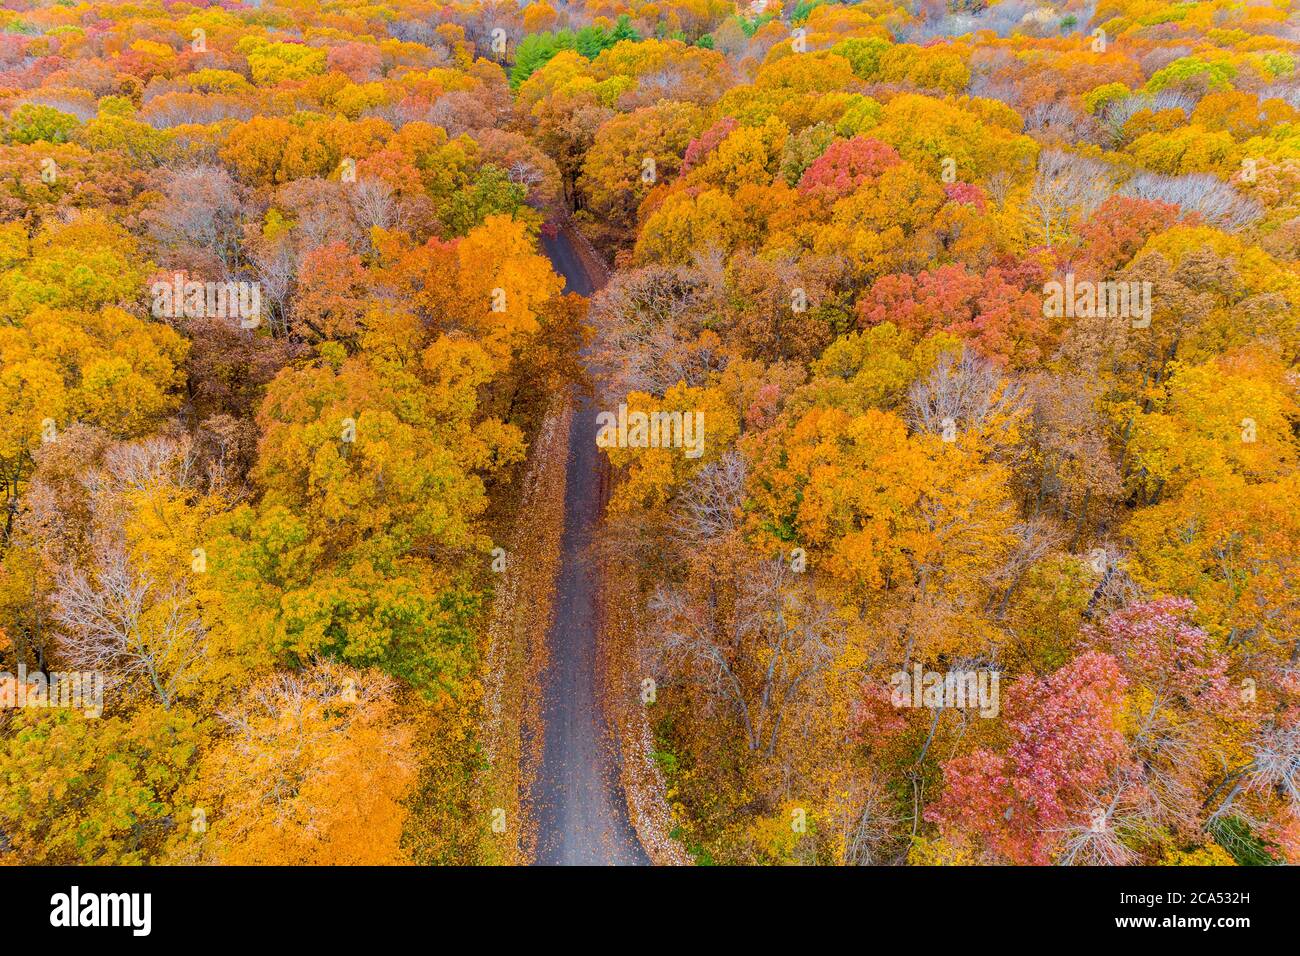 Aerial view of colorful trees in forest, Stephen A. Forbes State Park, Marion Co., Illinois, USA Stock Photo